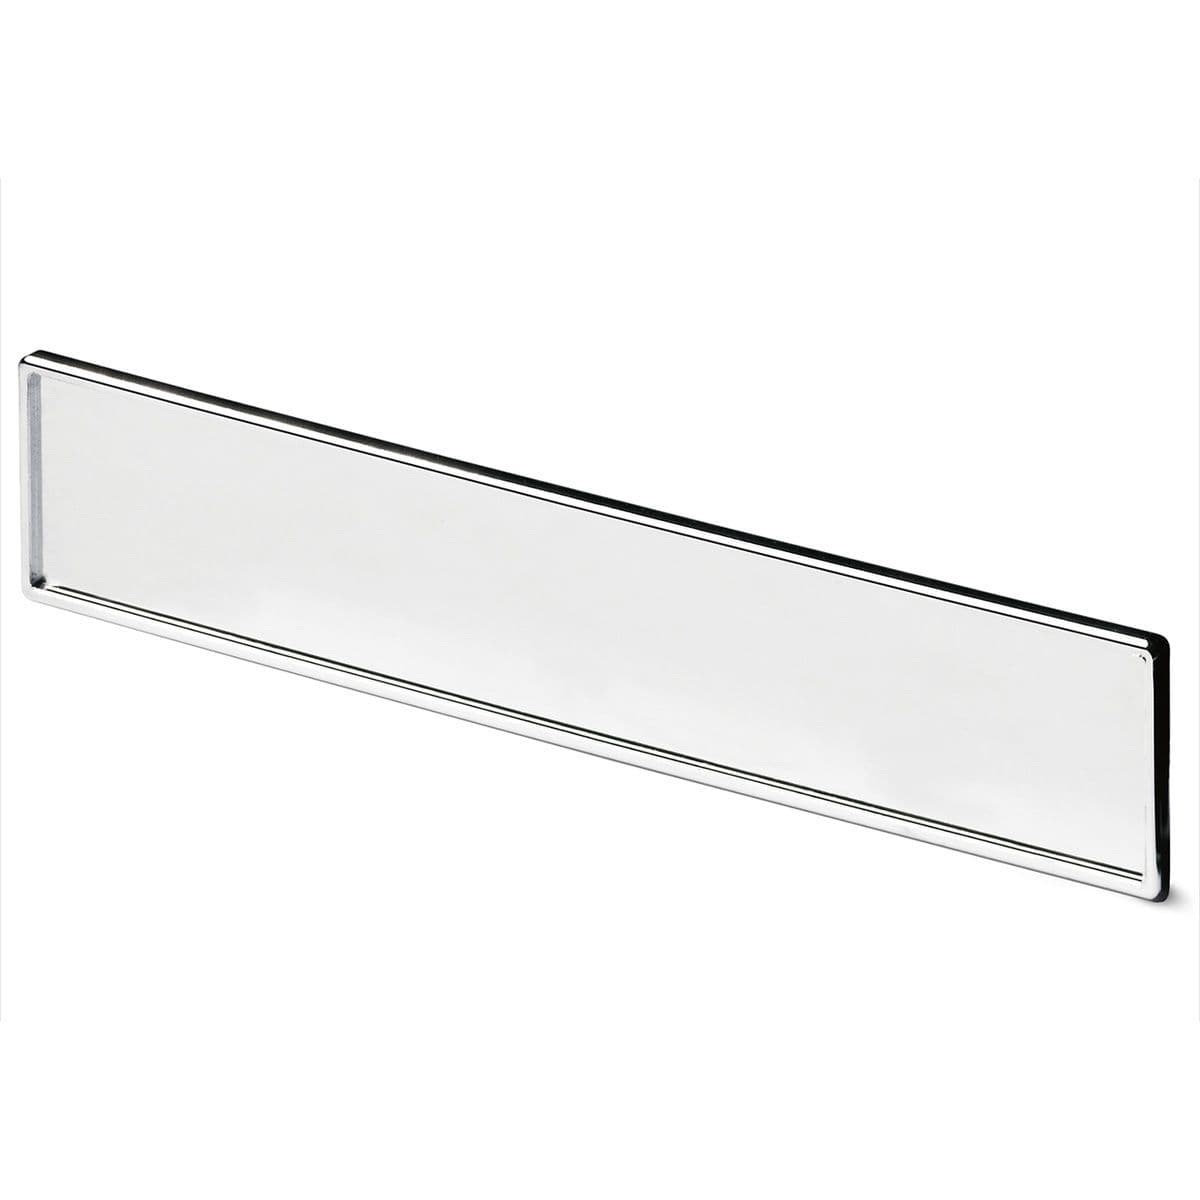 TOUCH-IN RECESSED Cupboard Handle - Trim Panel for Modular Rectangle - BRIGHT CHROME PLATED finish (HETTICH - Touch-In)